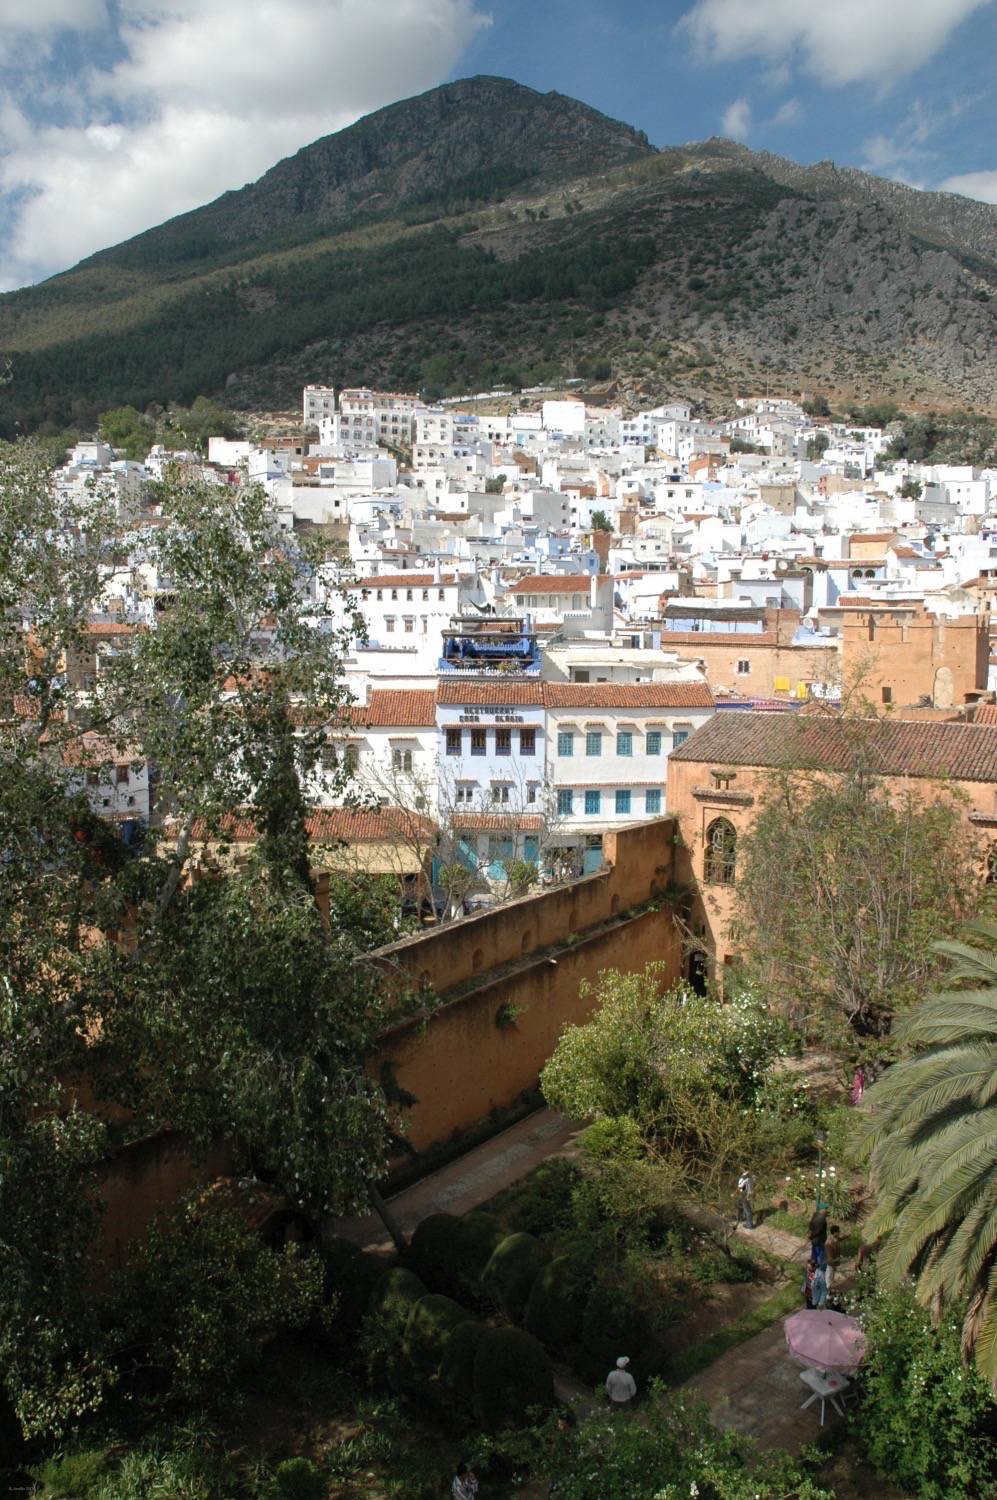 Bird's-eye view of the city, with the courtyard of the kasbah in the foreground and mountains beyond